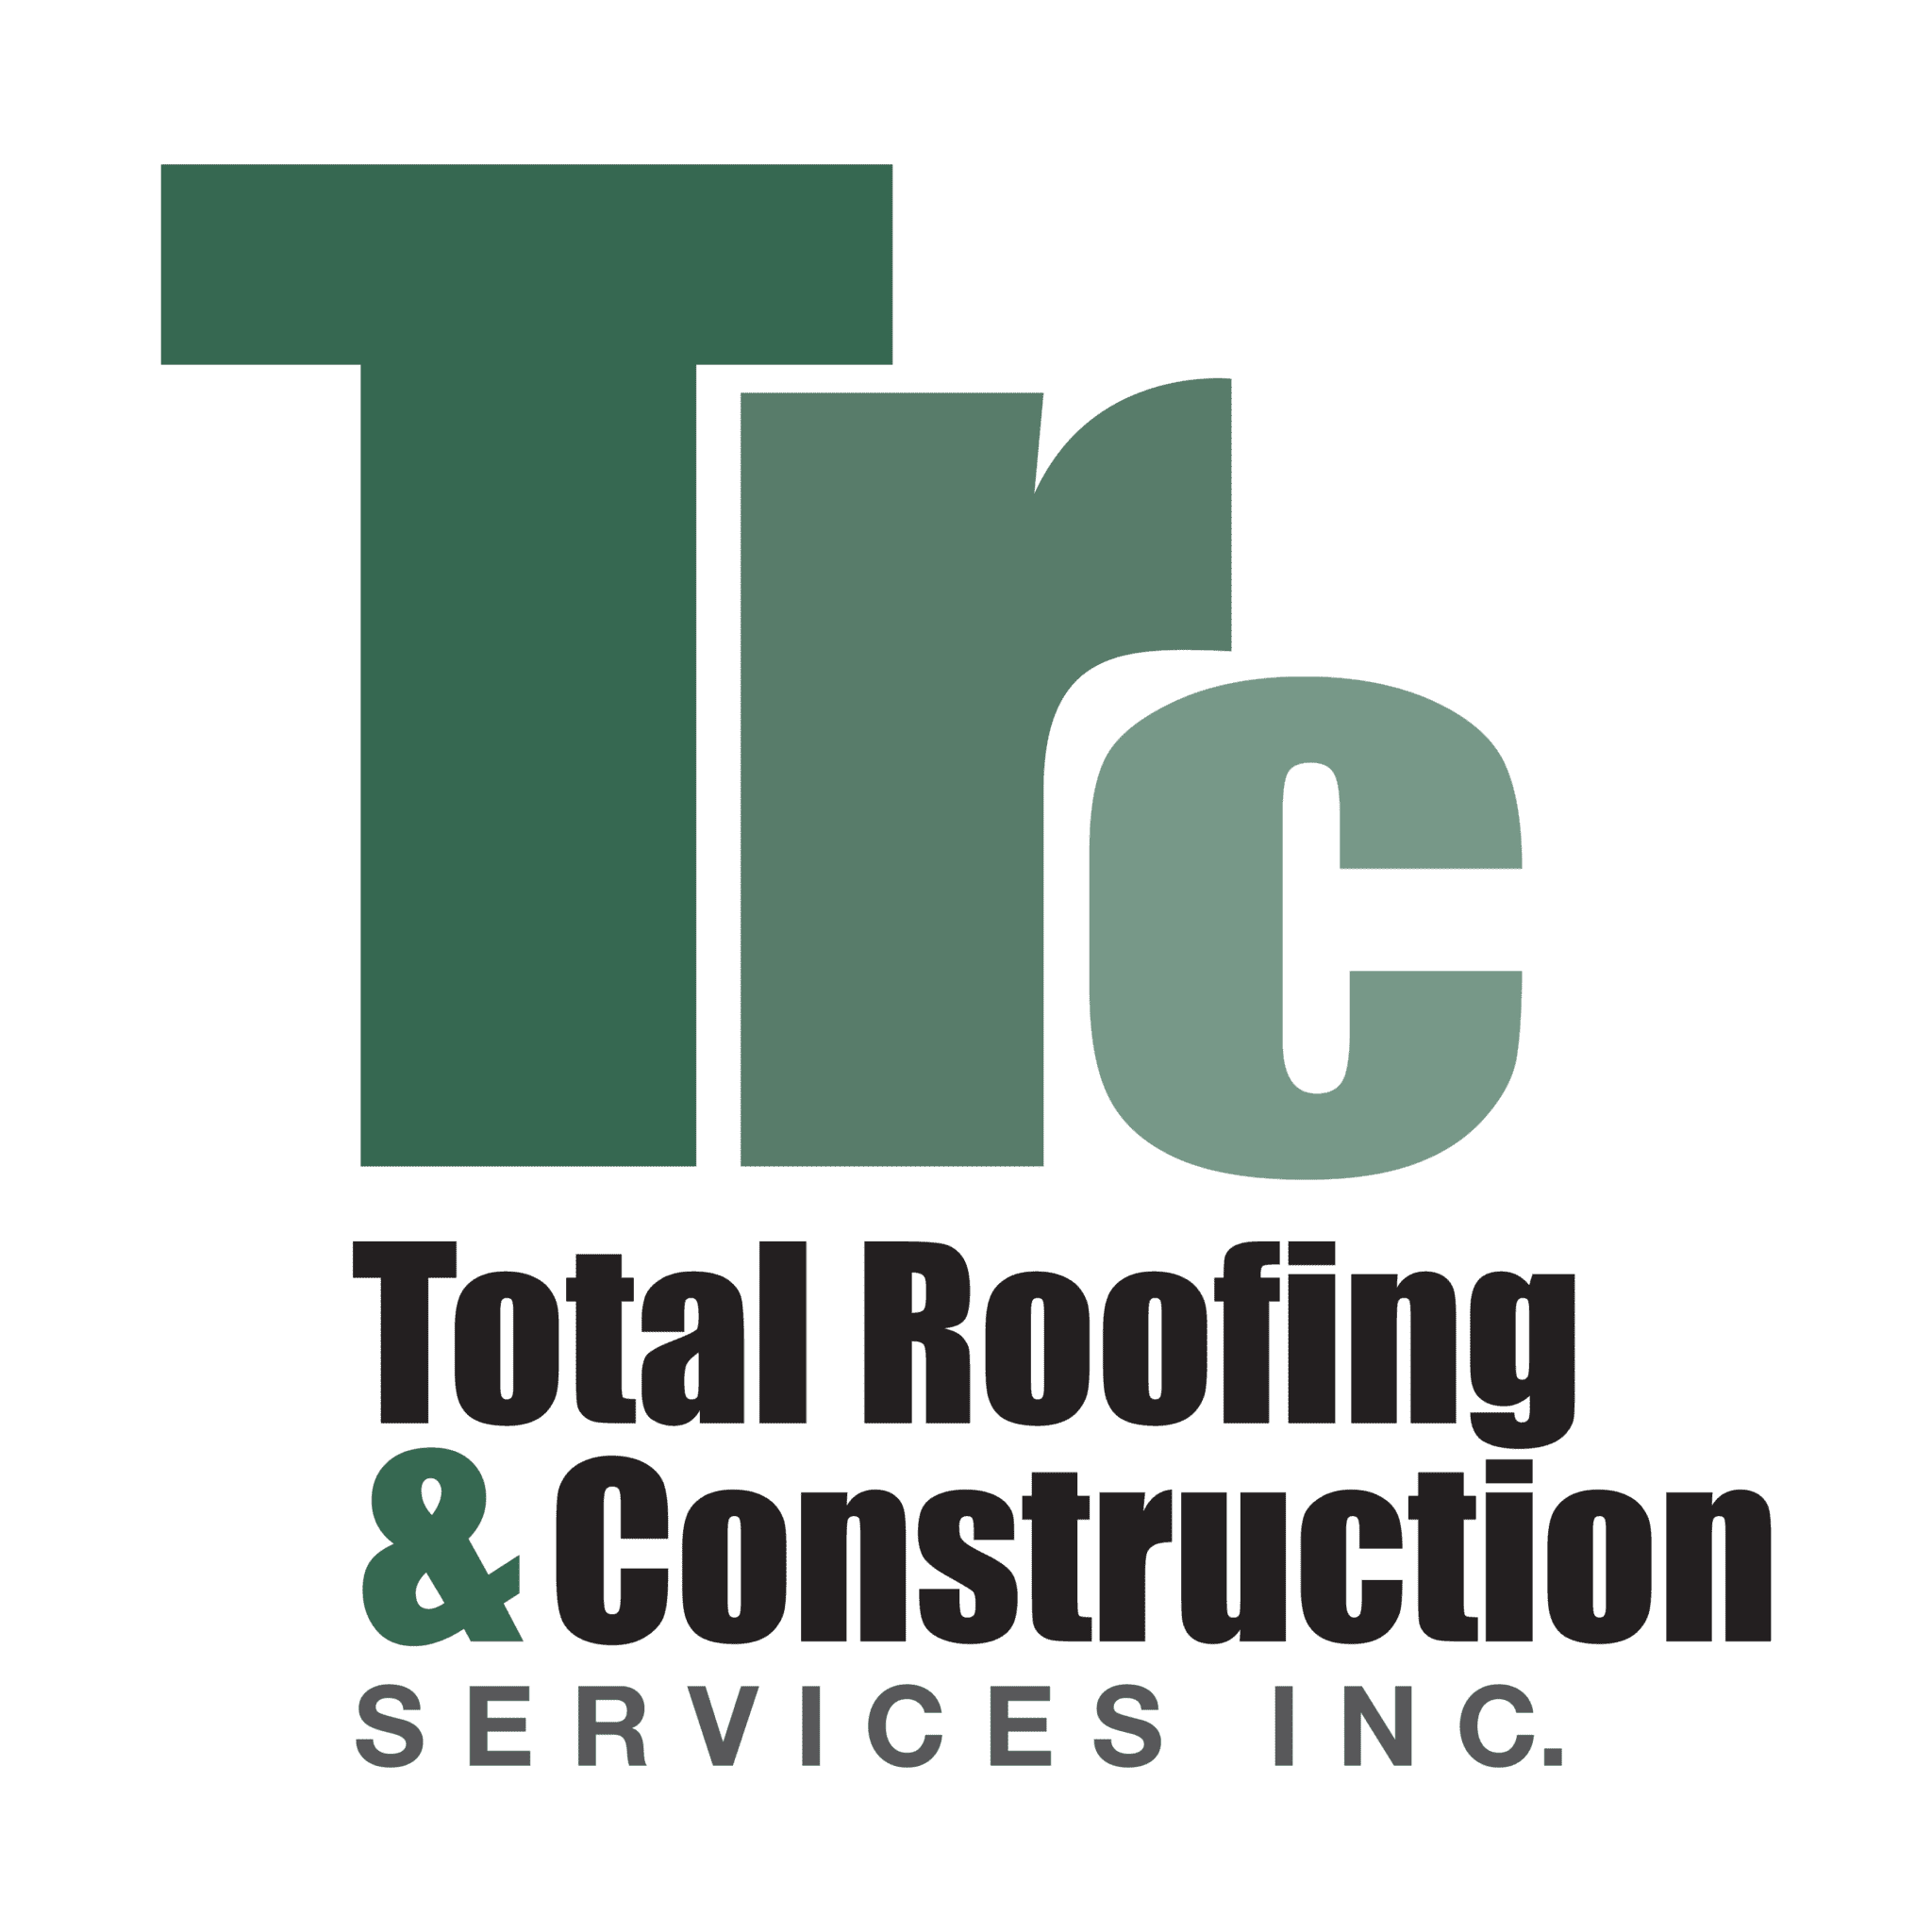 Total roofing & construction services, inc., specializing in True Mtn projects.